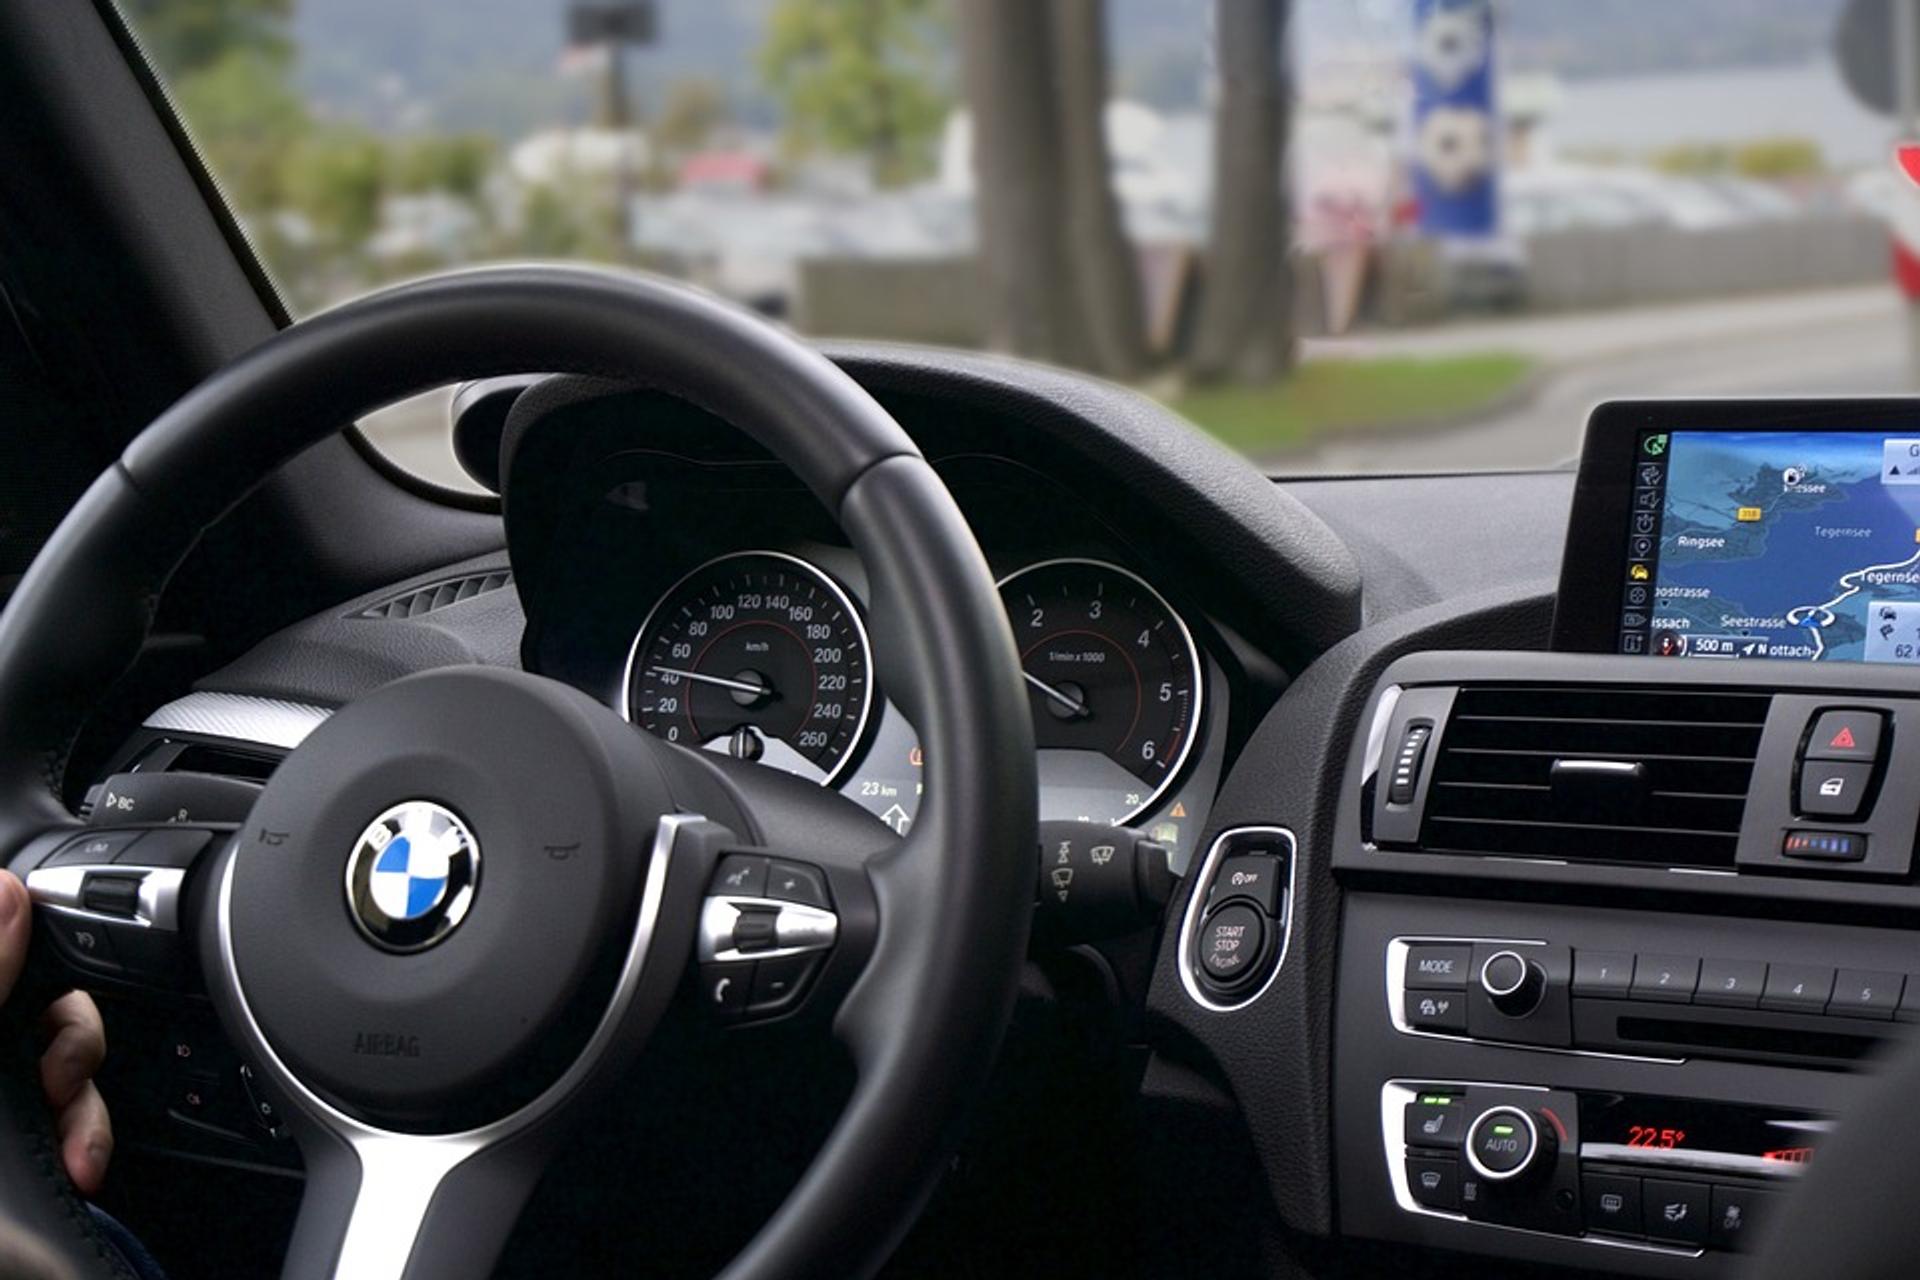 BMW steering wheel and panel